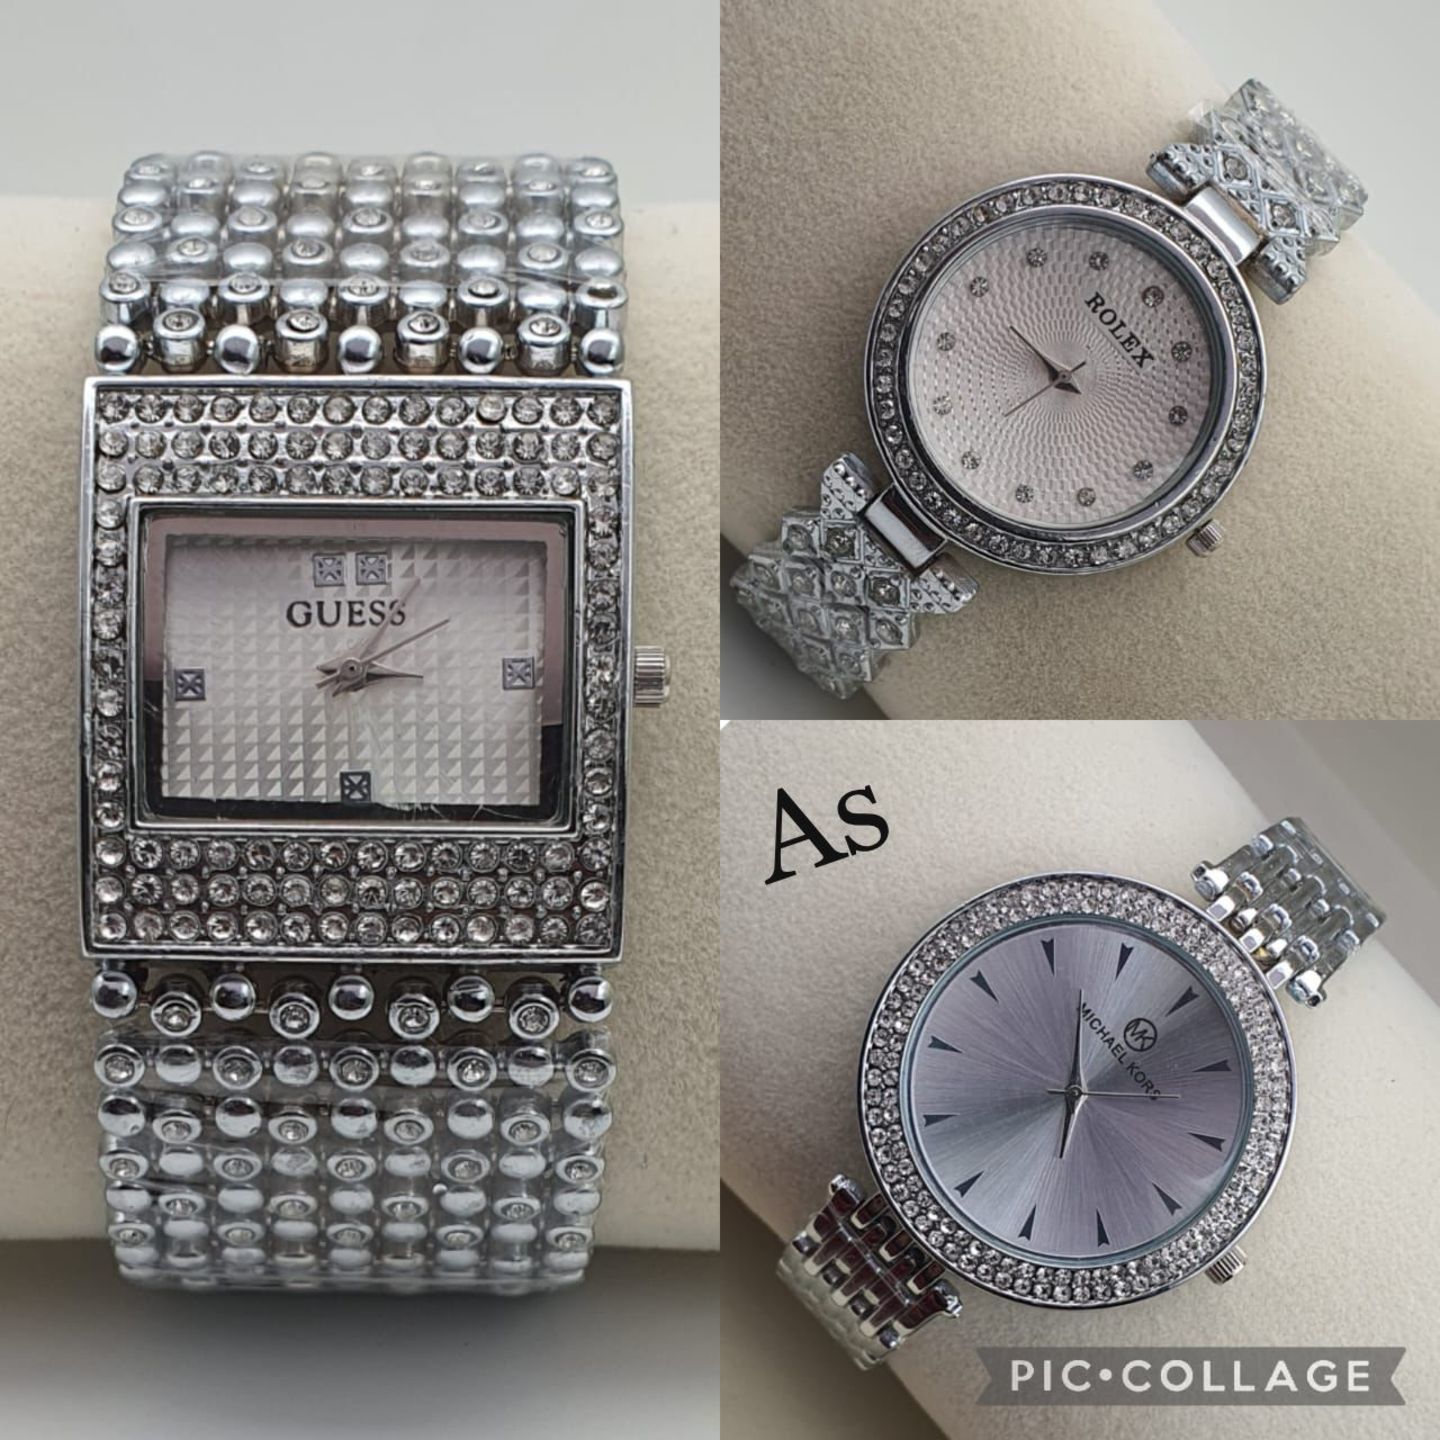 Ladies Guess,Rolex Combo Watch Gift  Engagement, anniversary, valentines day, mothers day for sister, wife,friend,mother, baby shower